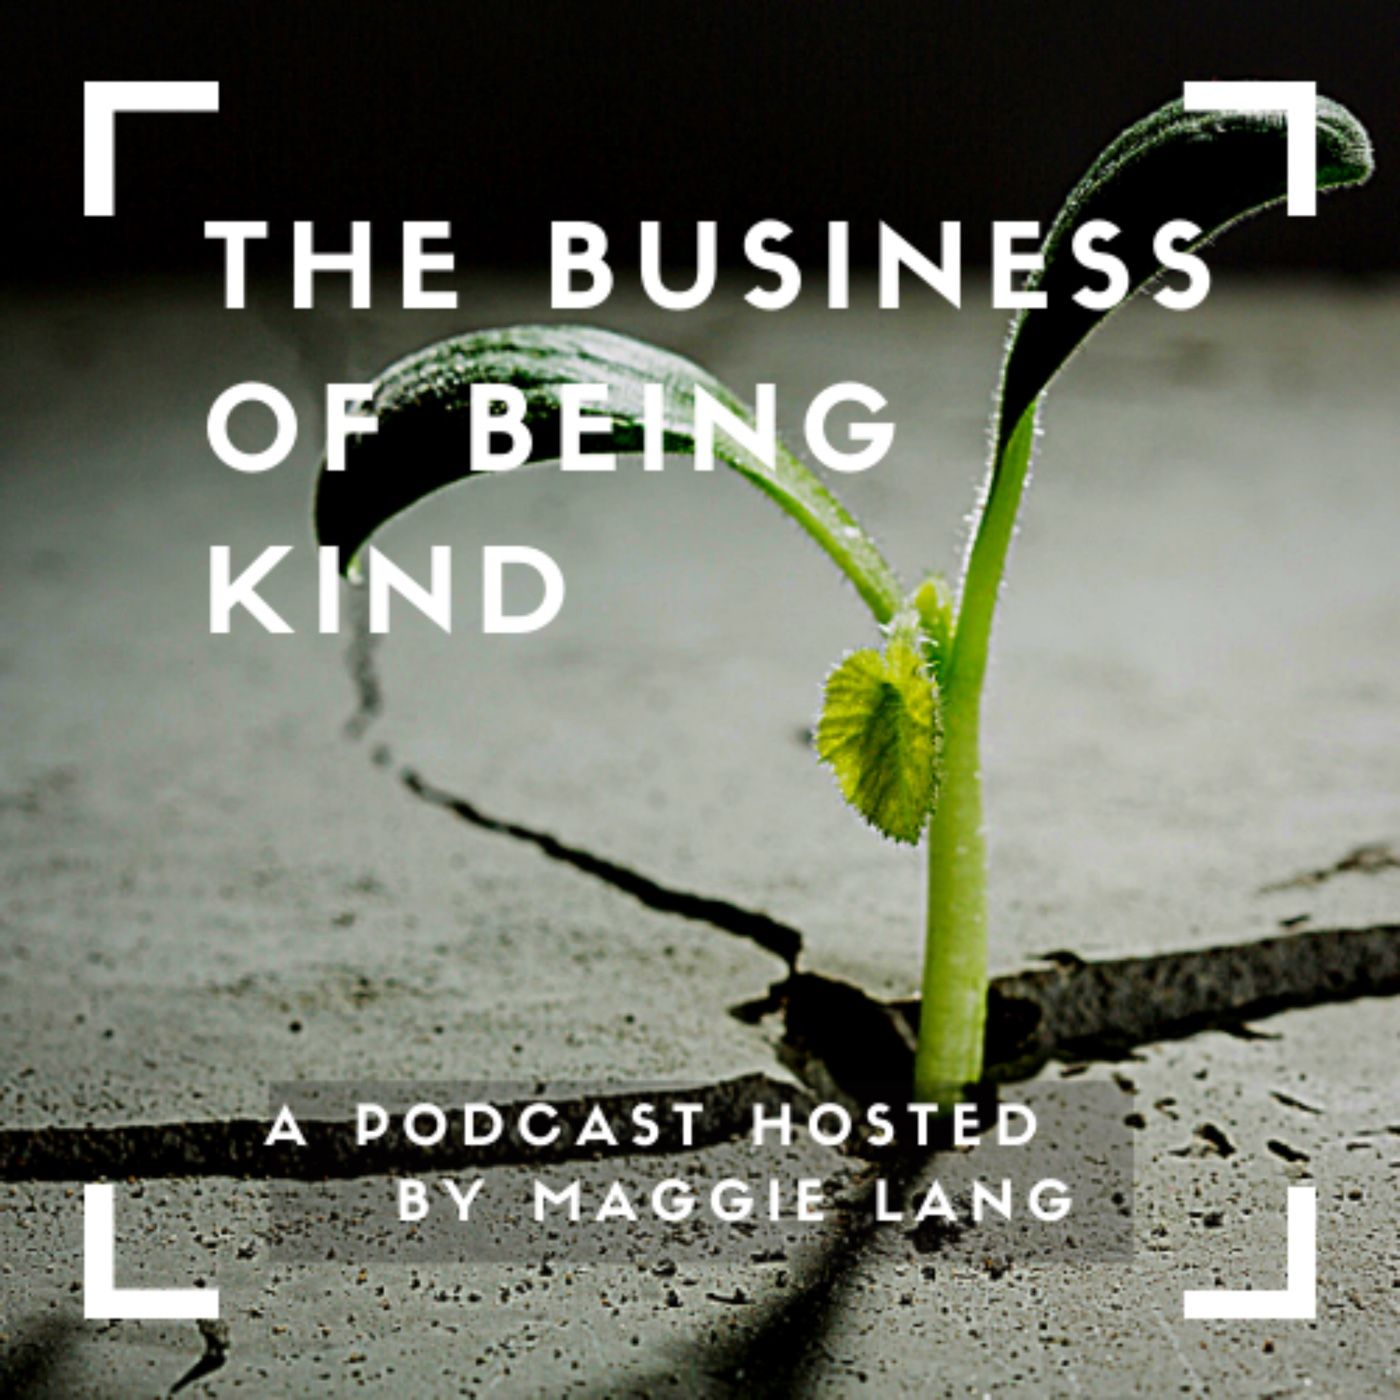 The Business of Being Kind